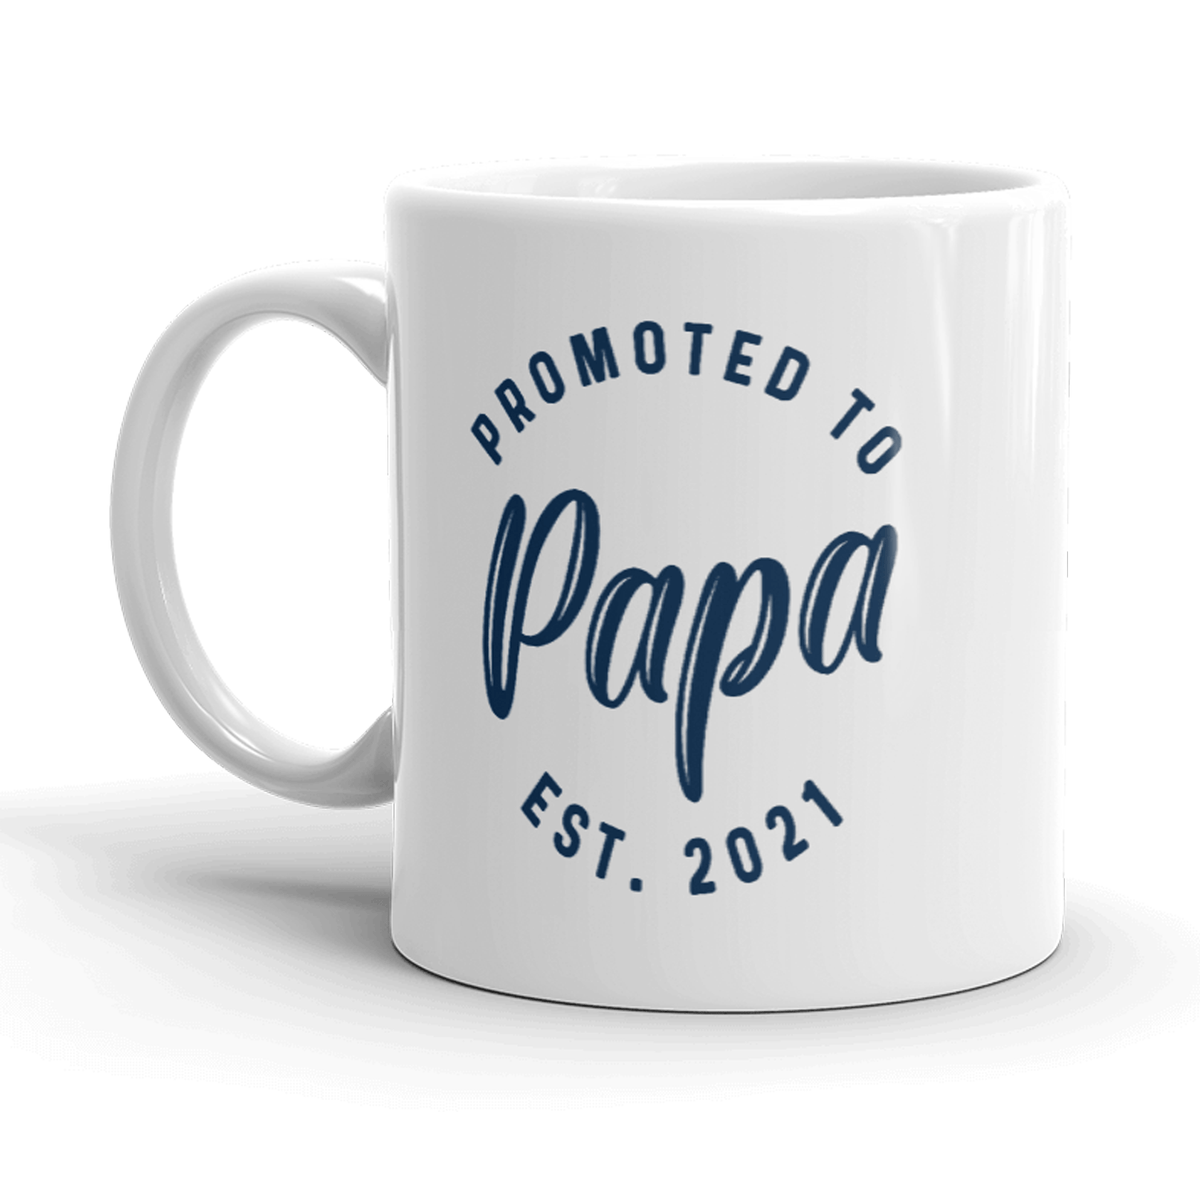 Promoted To Papa 2021 Mug Funny New Baby Family Graphic Coffee Cup-11oz - Crazy Dog T-Shirts